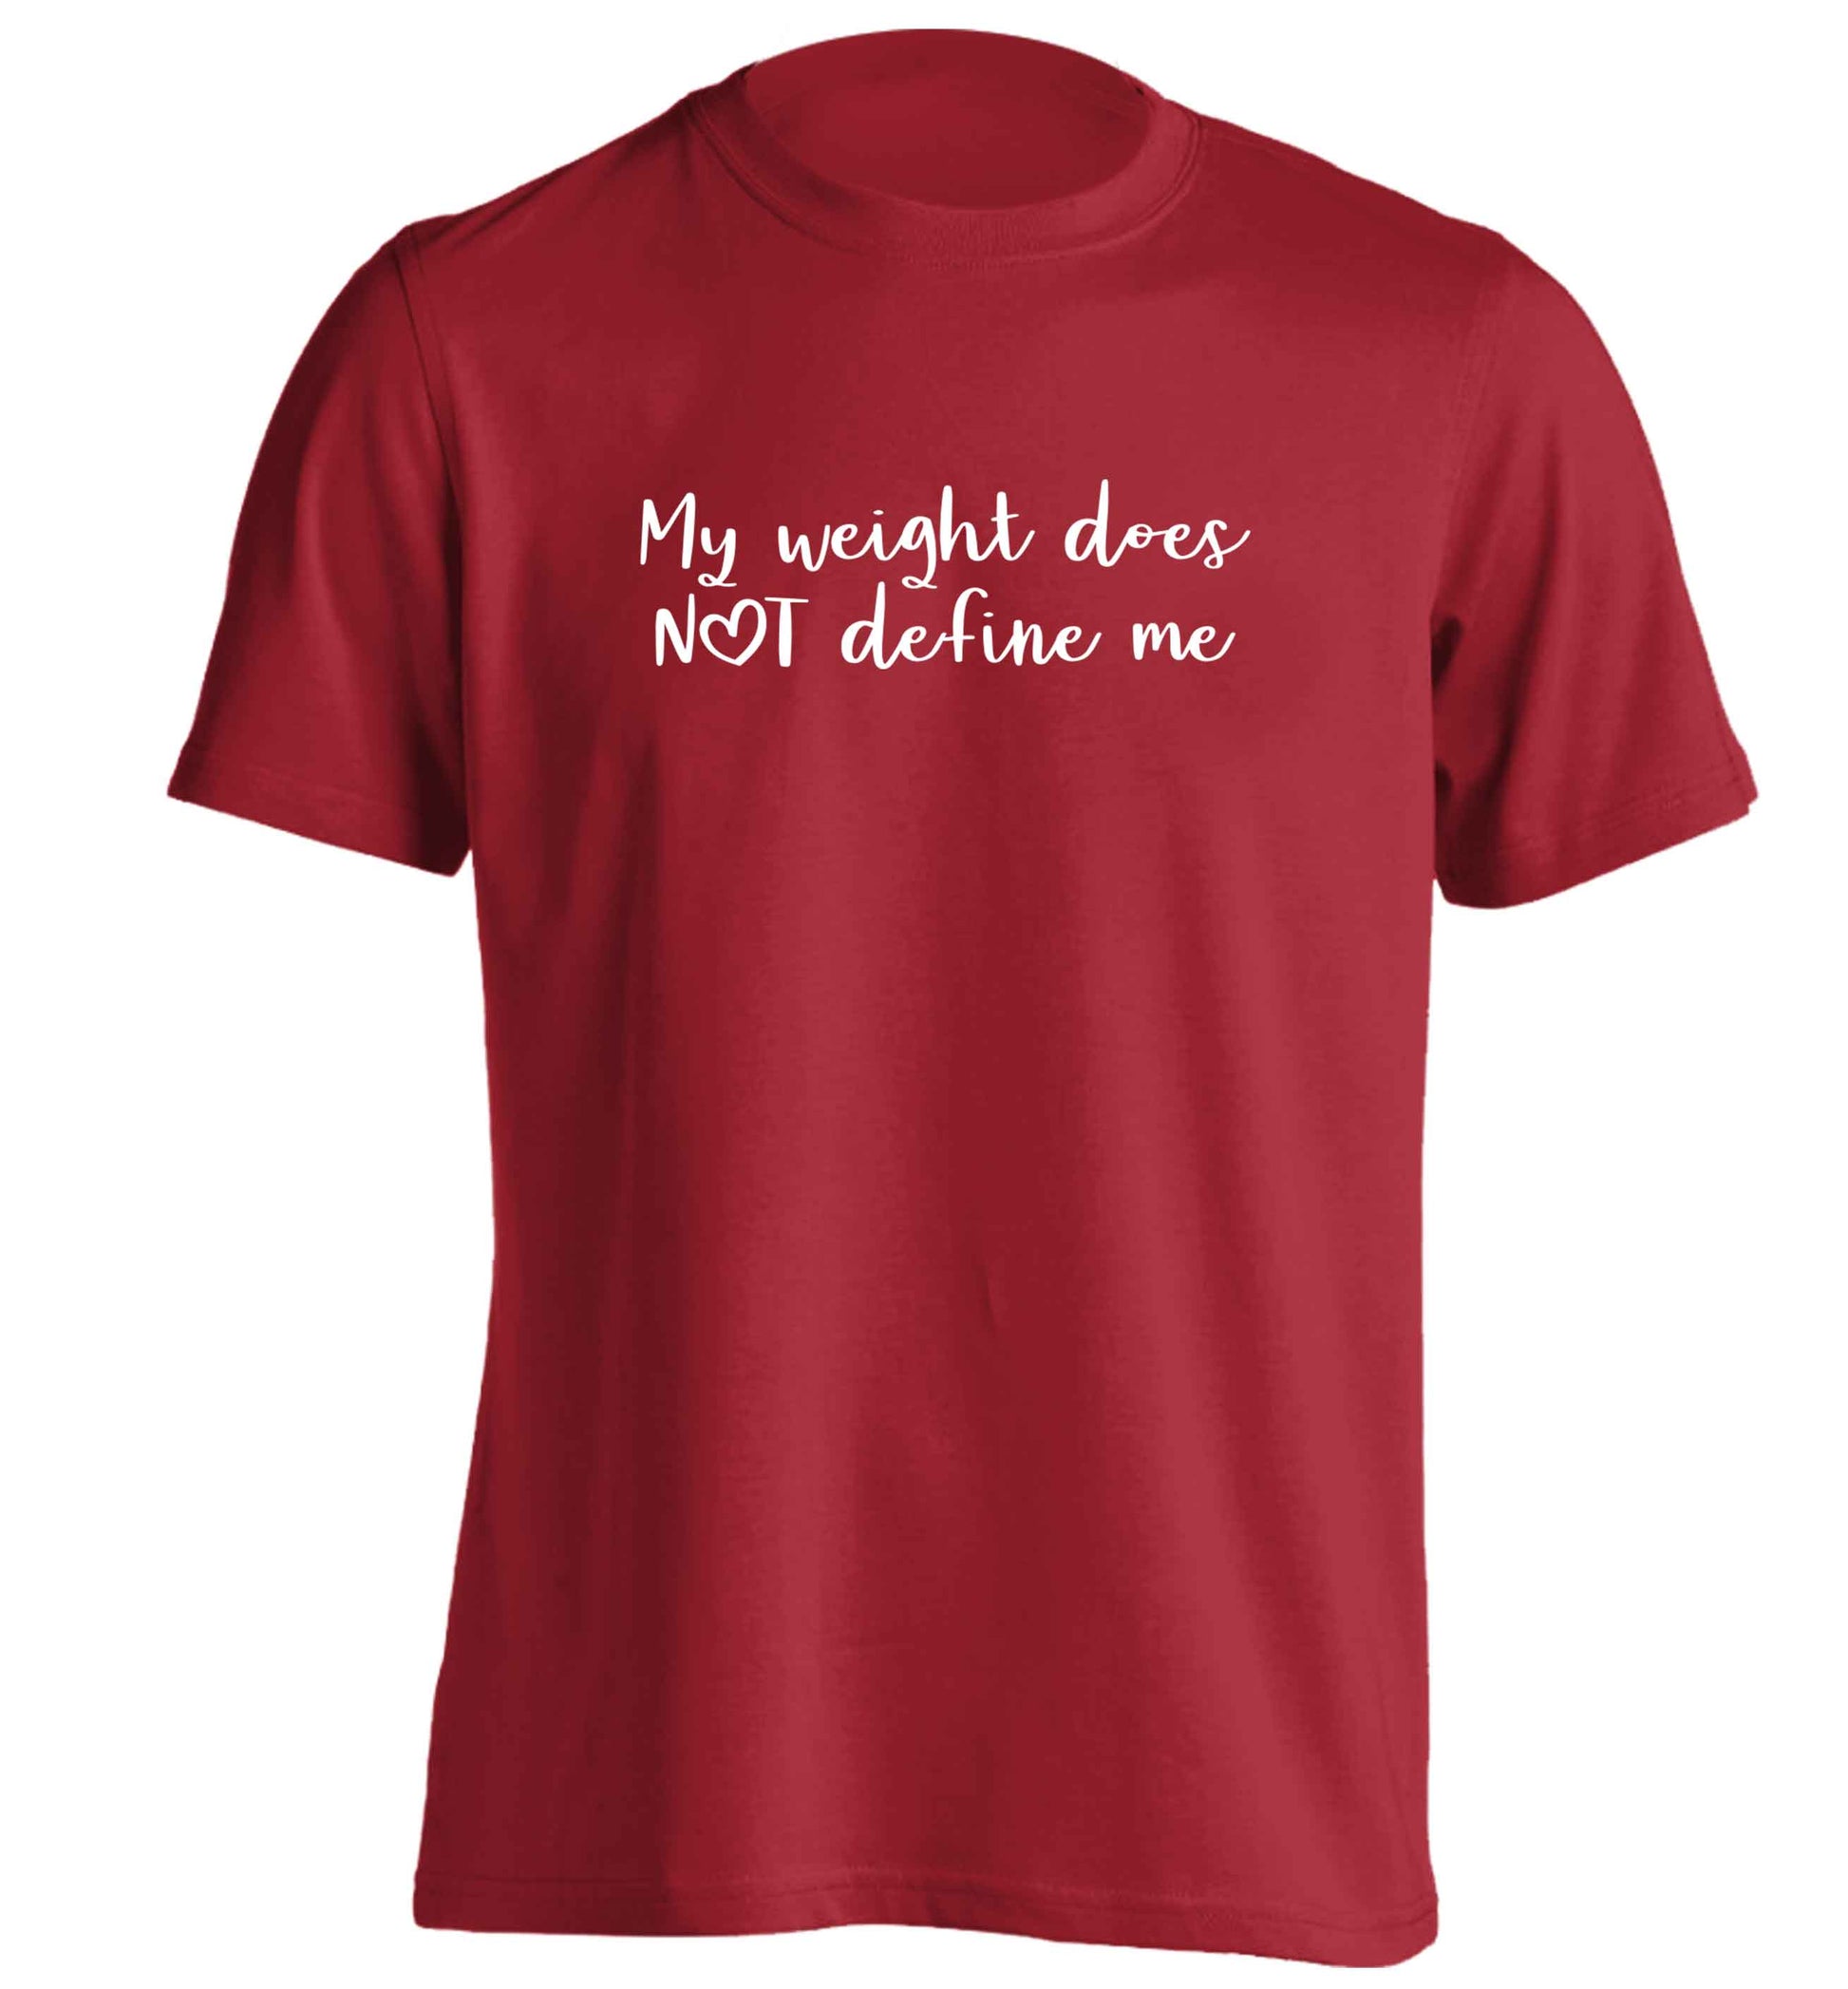 My weight does not define me adults unisex red Tshirt 2XL